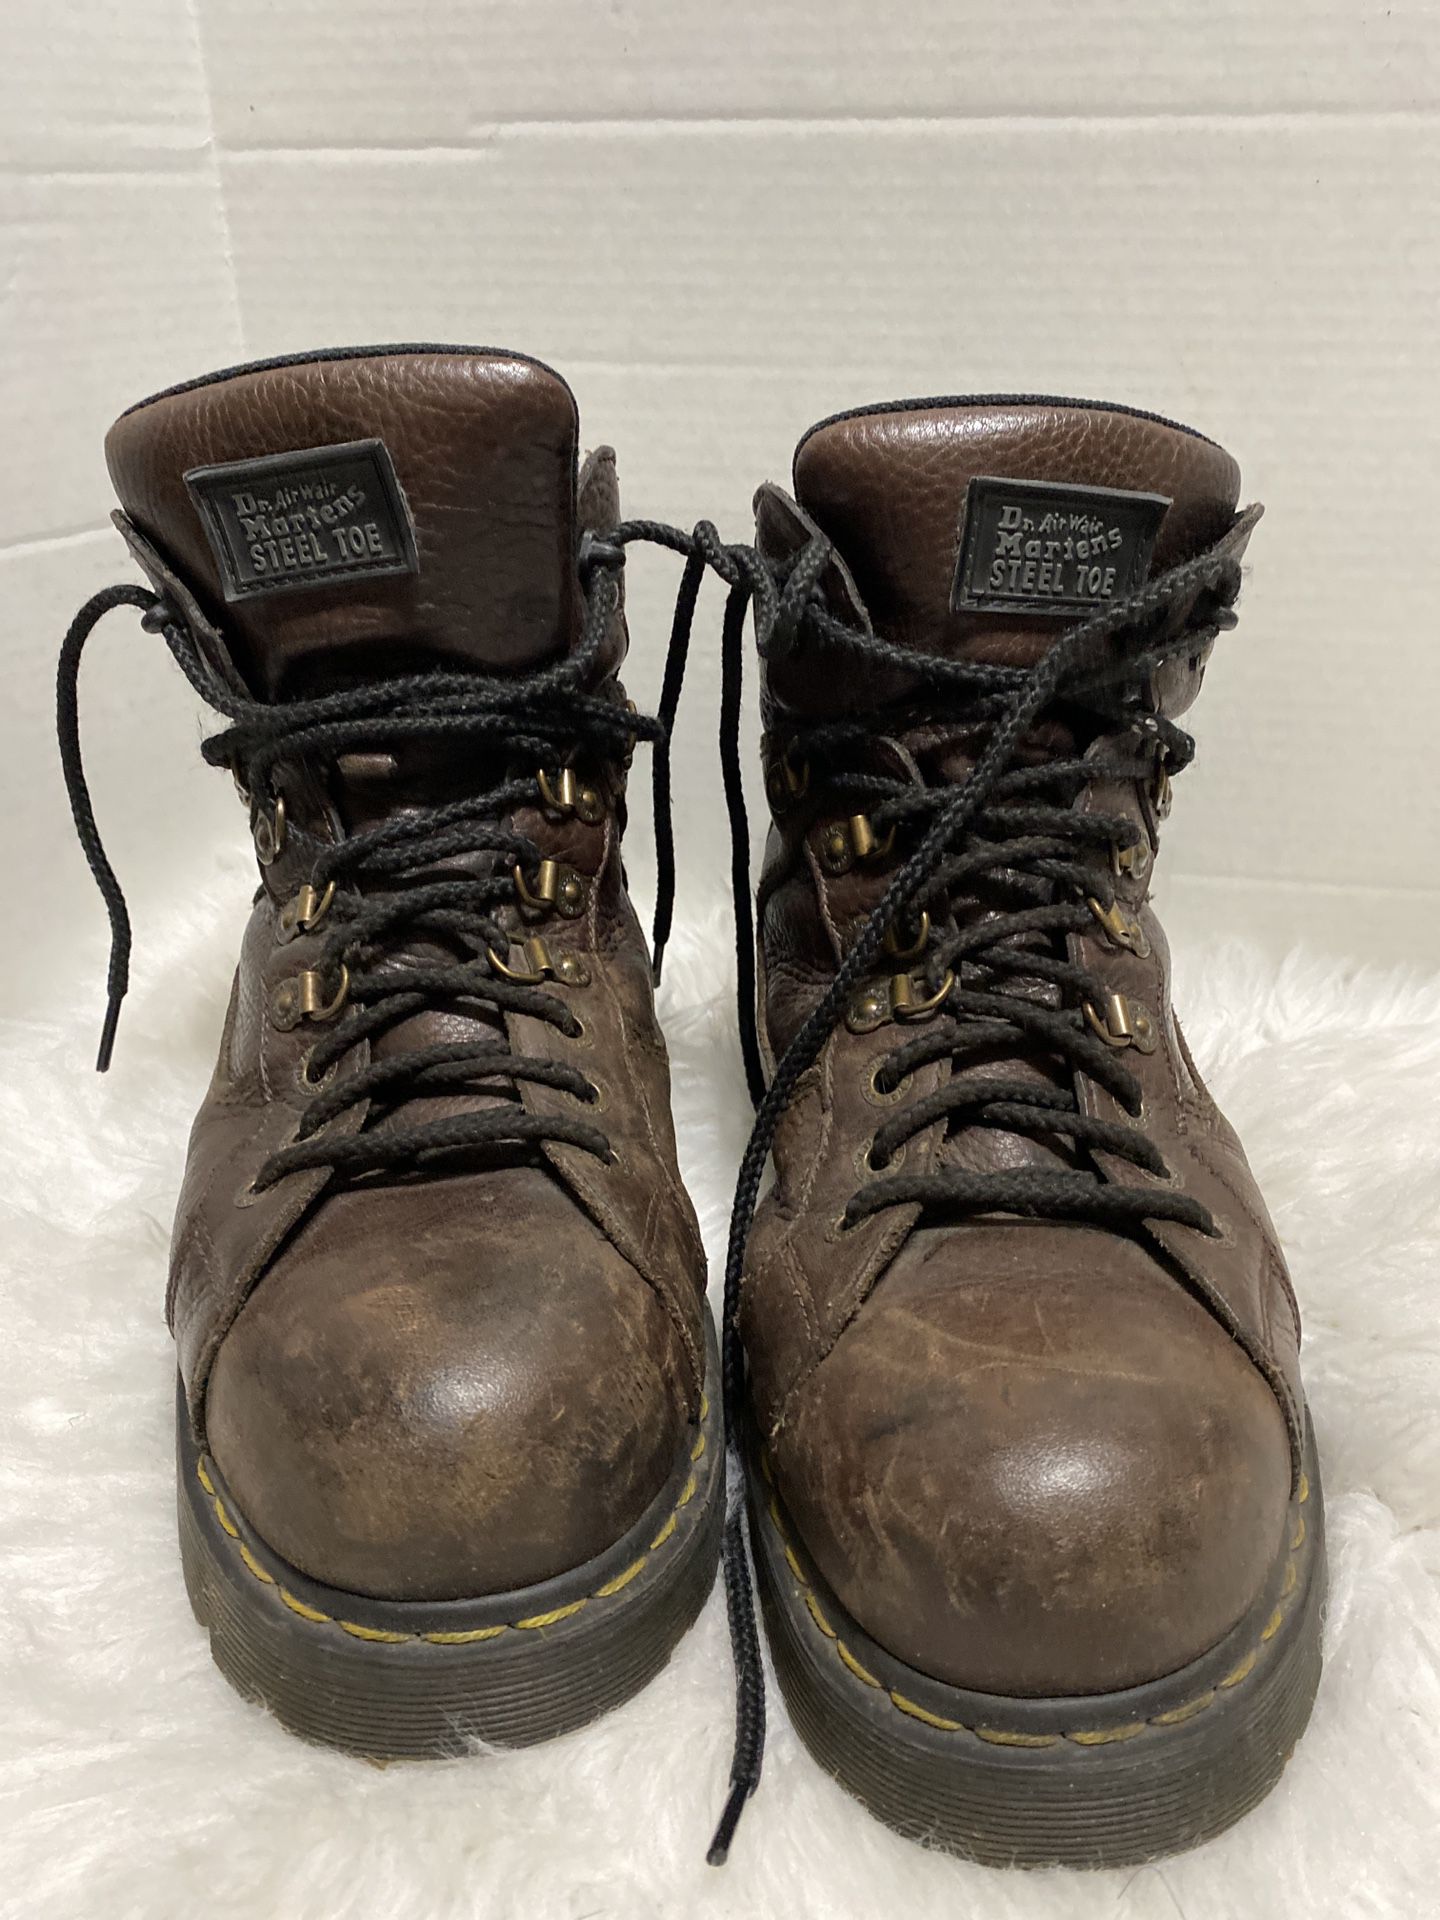 Dr. Martens England 8855 Steel Toe Brown Leather Boots Work Lace-Up UK 10 USA 11